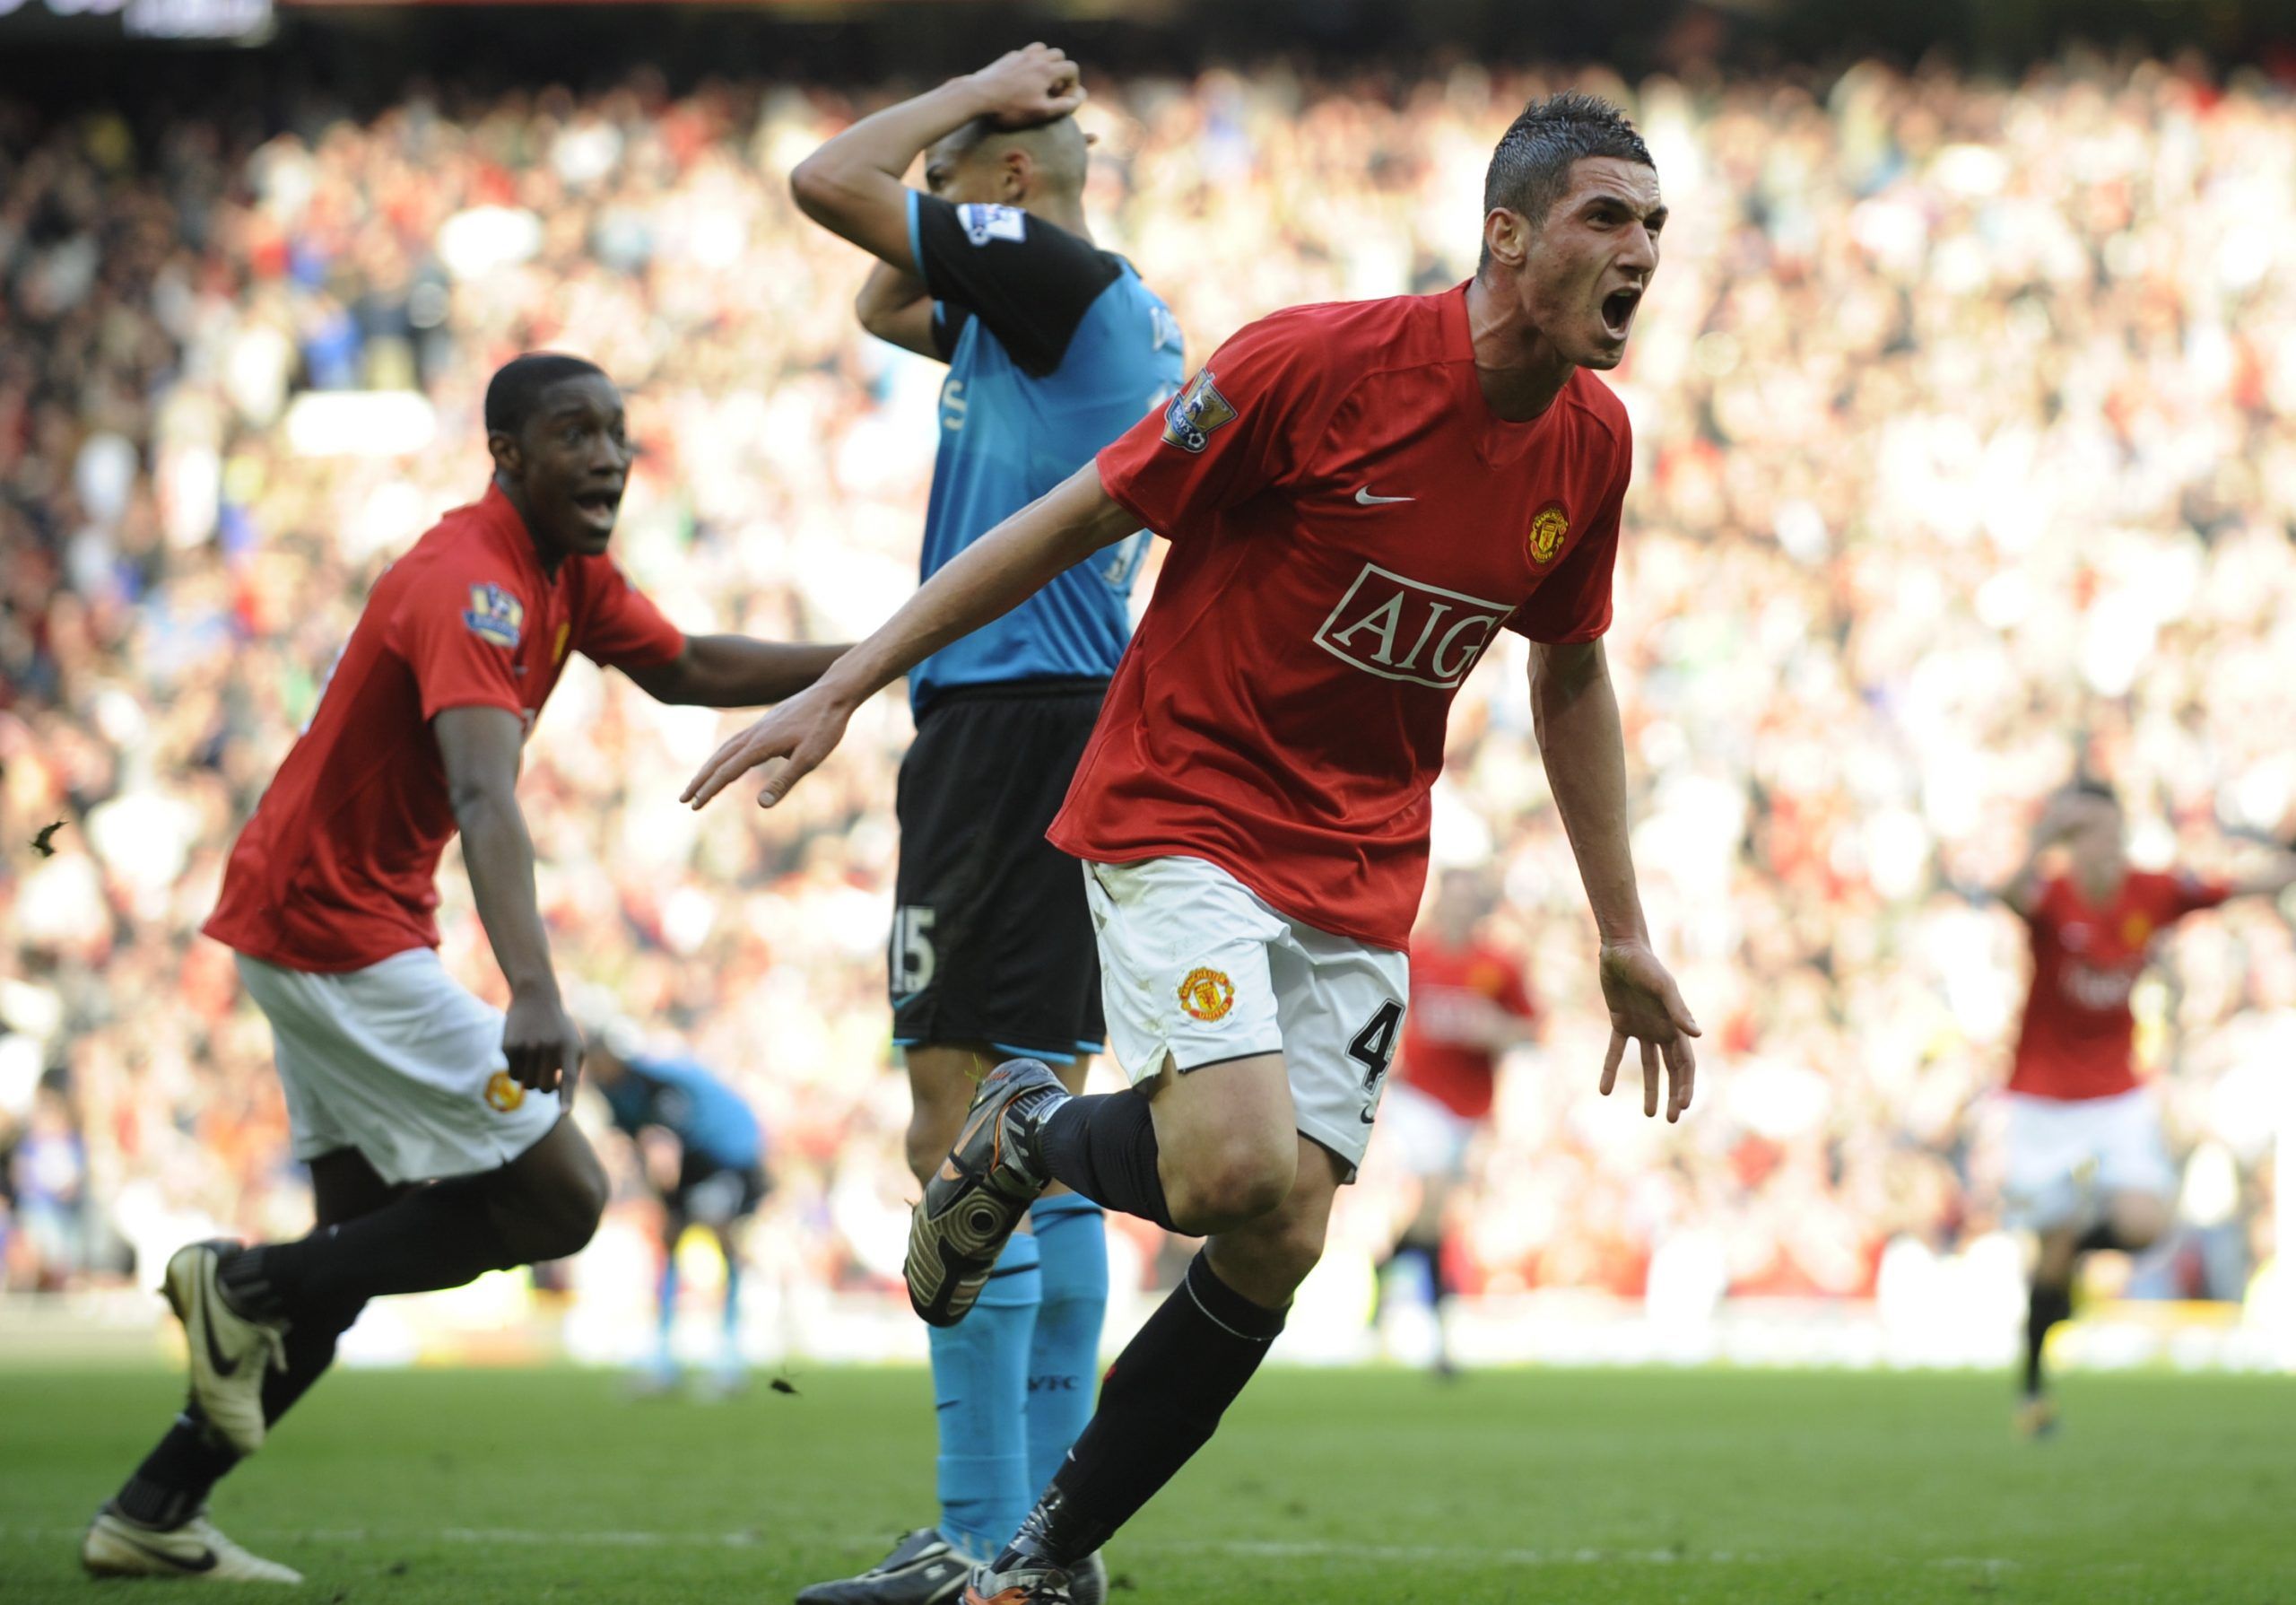 Football - Manchester United v Aston Villa - Barclays Premier League - Old Trafford - 08/09 - 5/4/09 
Federico Macheda - Manchester United celebrates after scoring his teams third goal  
Mandatory Credit: Action Images / Michael Regan 
NO ONLINE/INTERNET USE WITHOUT A LICENCE FROM THE FOOTBALL DATA CO LTD. FOR LICENCE ENQUIRIES PLEASE TELEPHONE +44 (0) 207 864 9000.